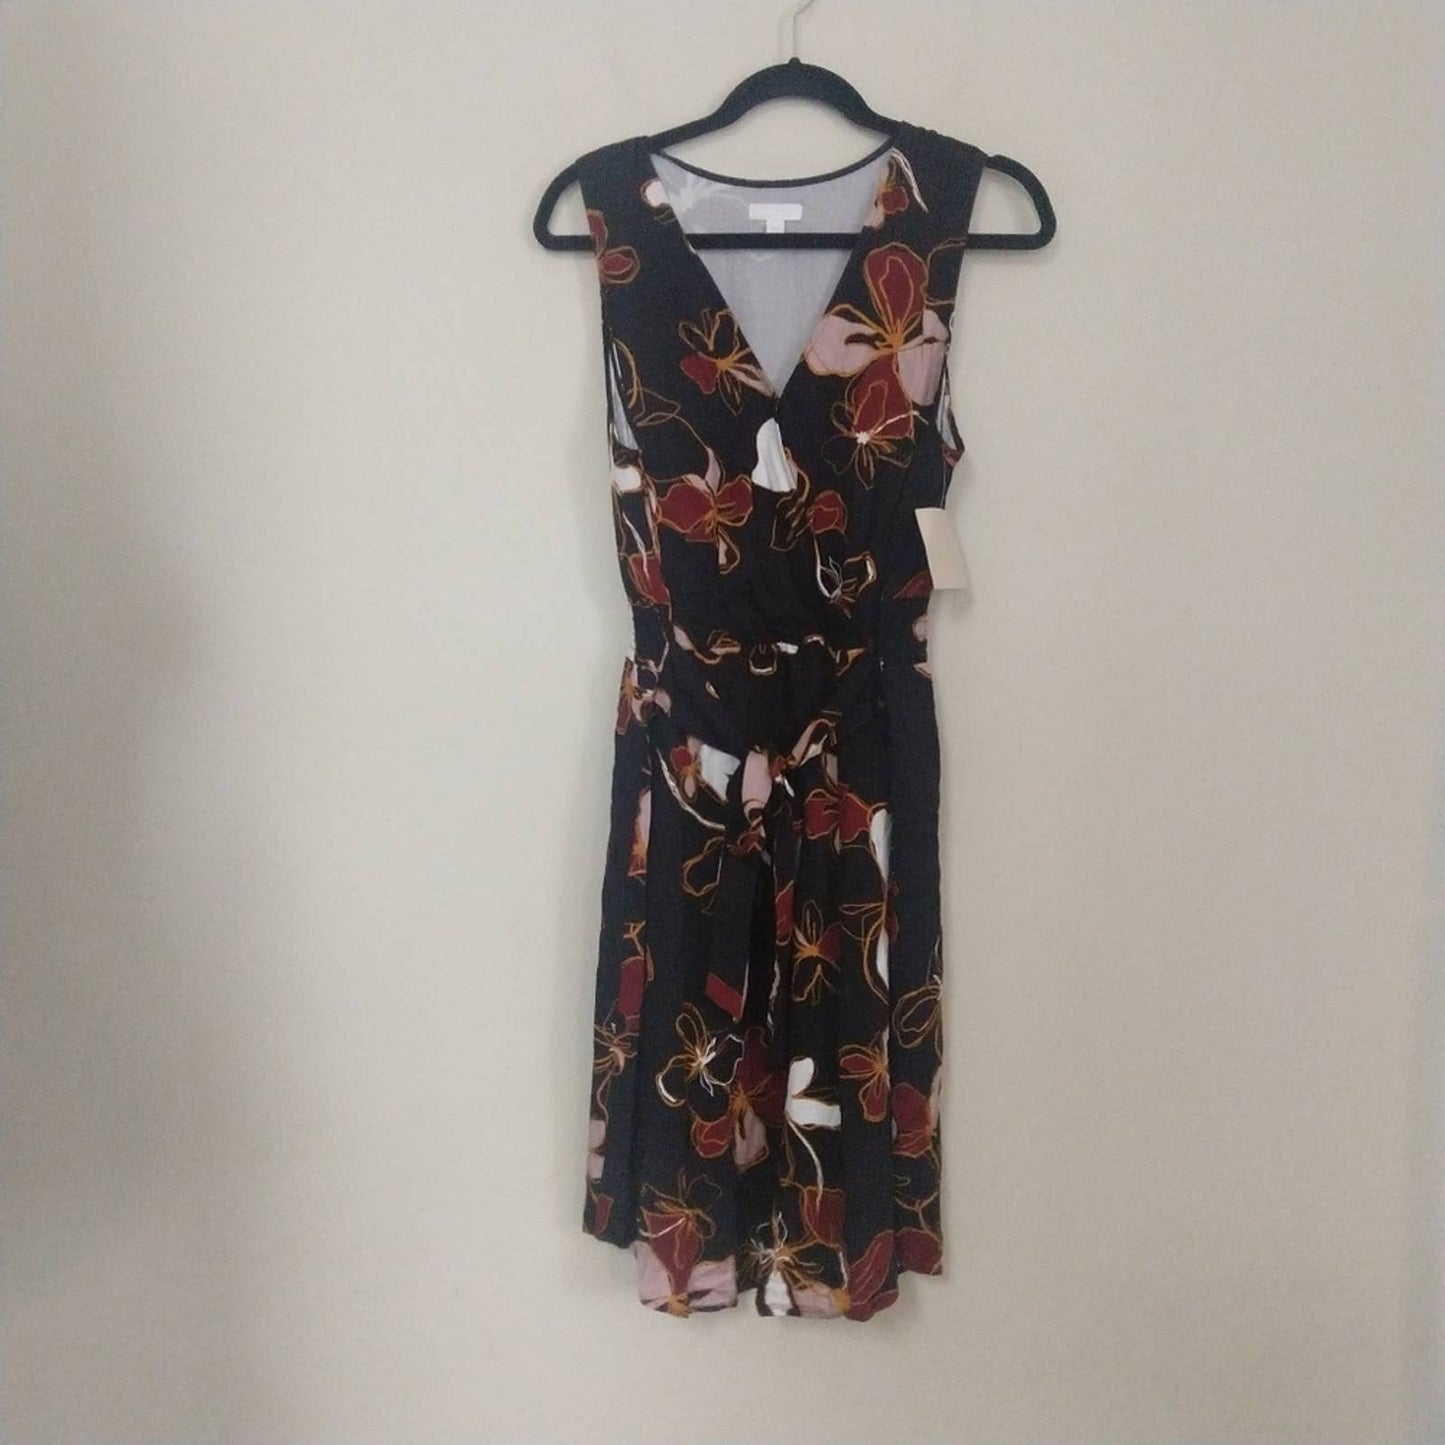 14th & Union Front Tie Floral Sleeveless Dress M